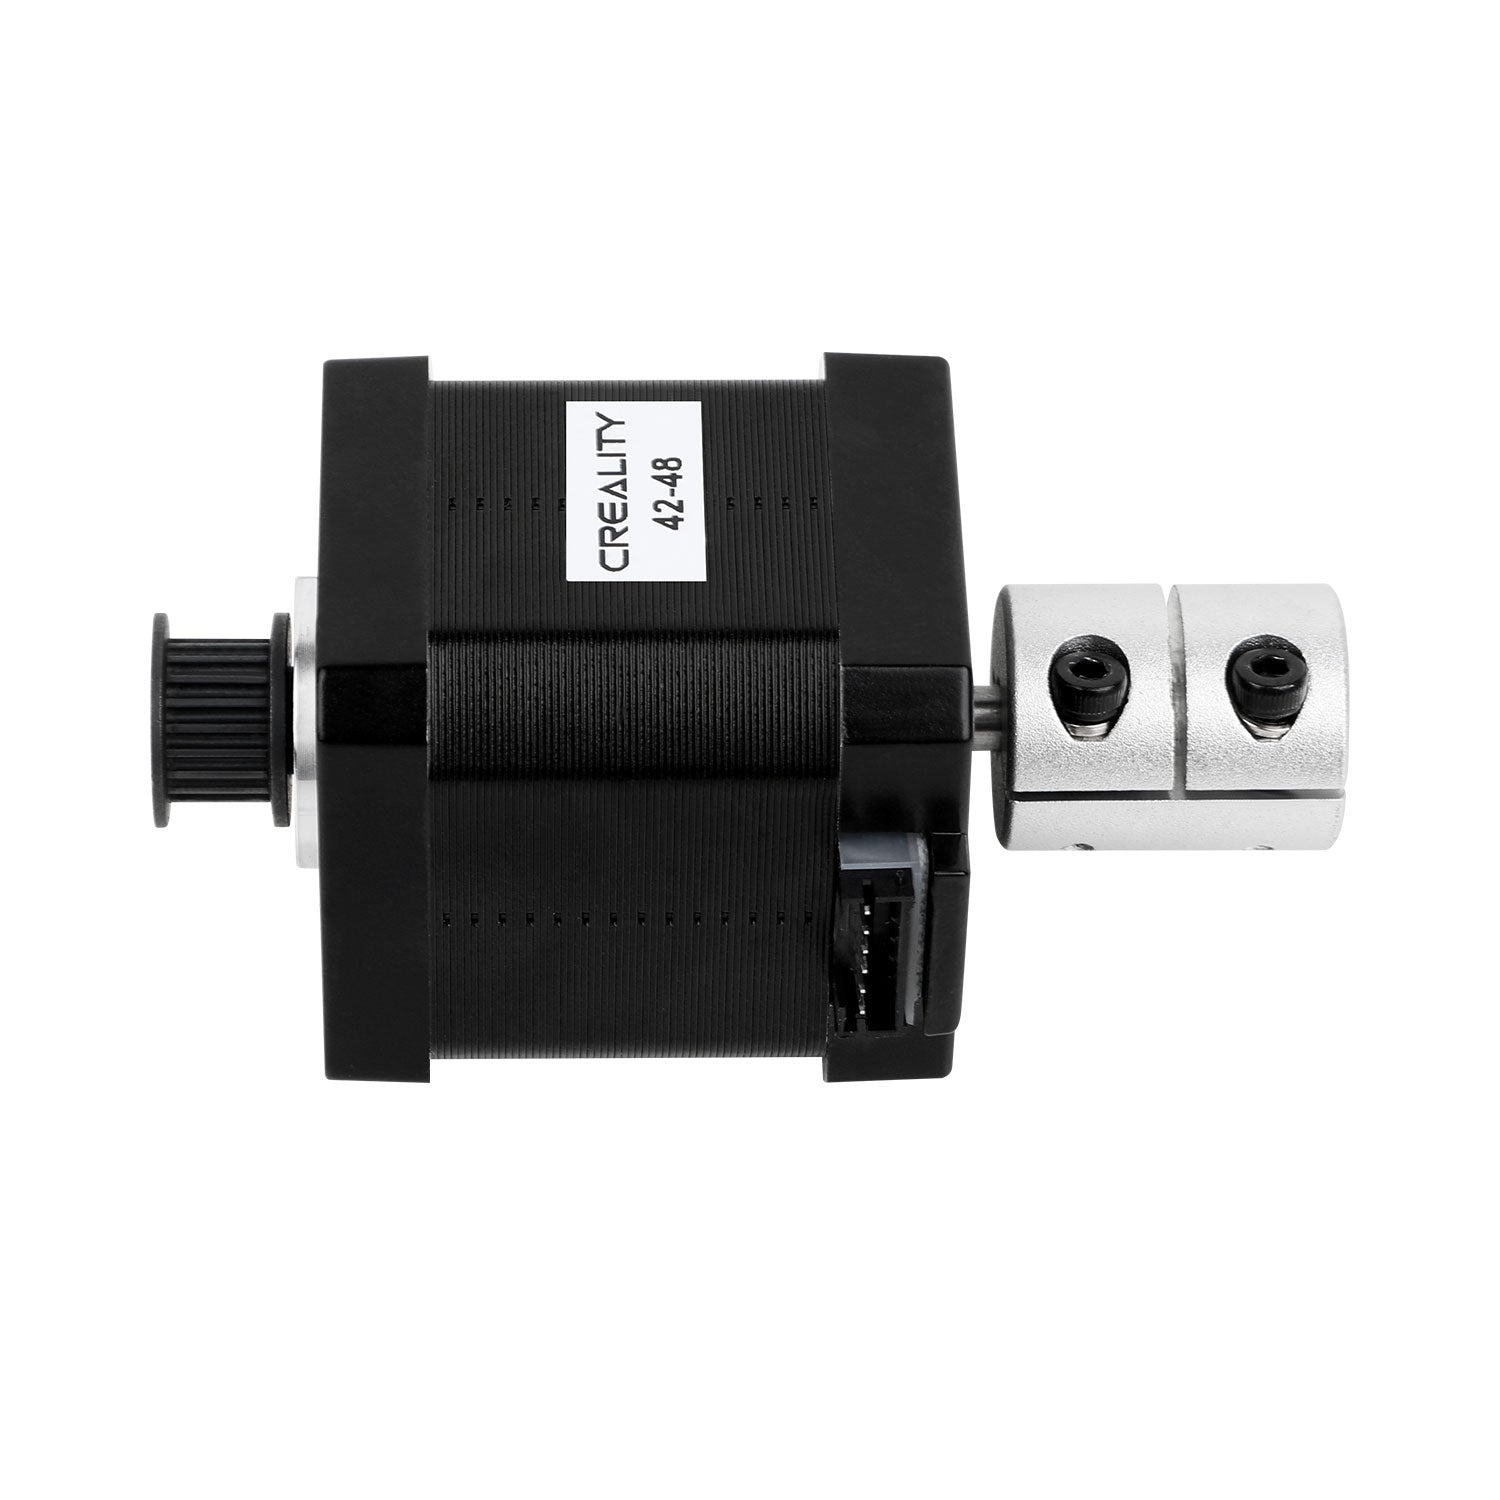 Creality 3D - 42-48 Stepper Motor + Coupling - Y-axis Motor Kit - Ender-5 S1